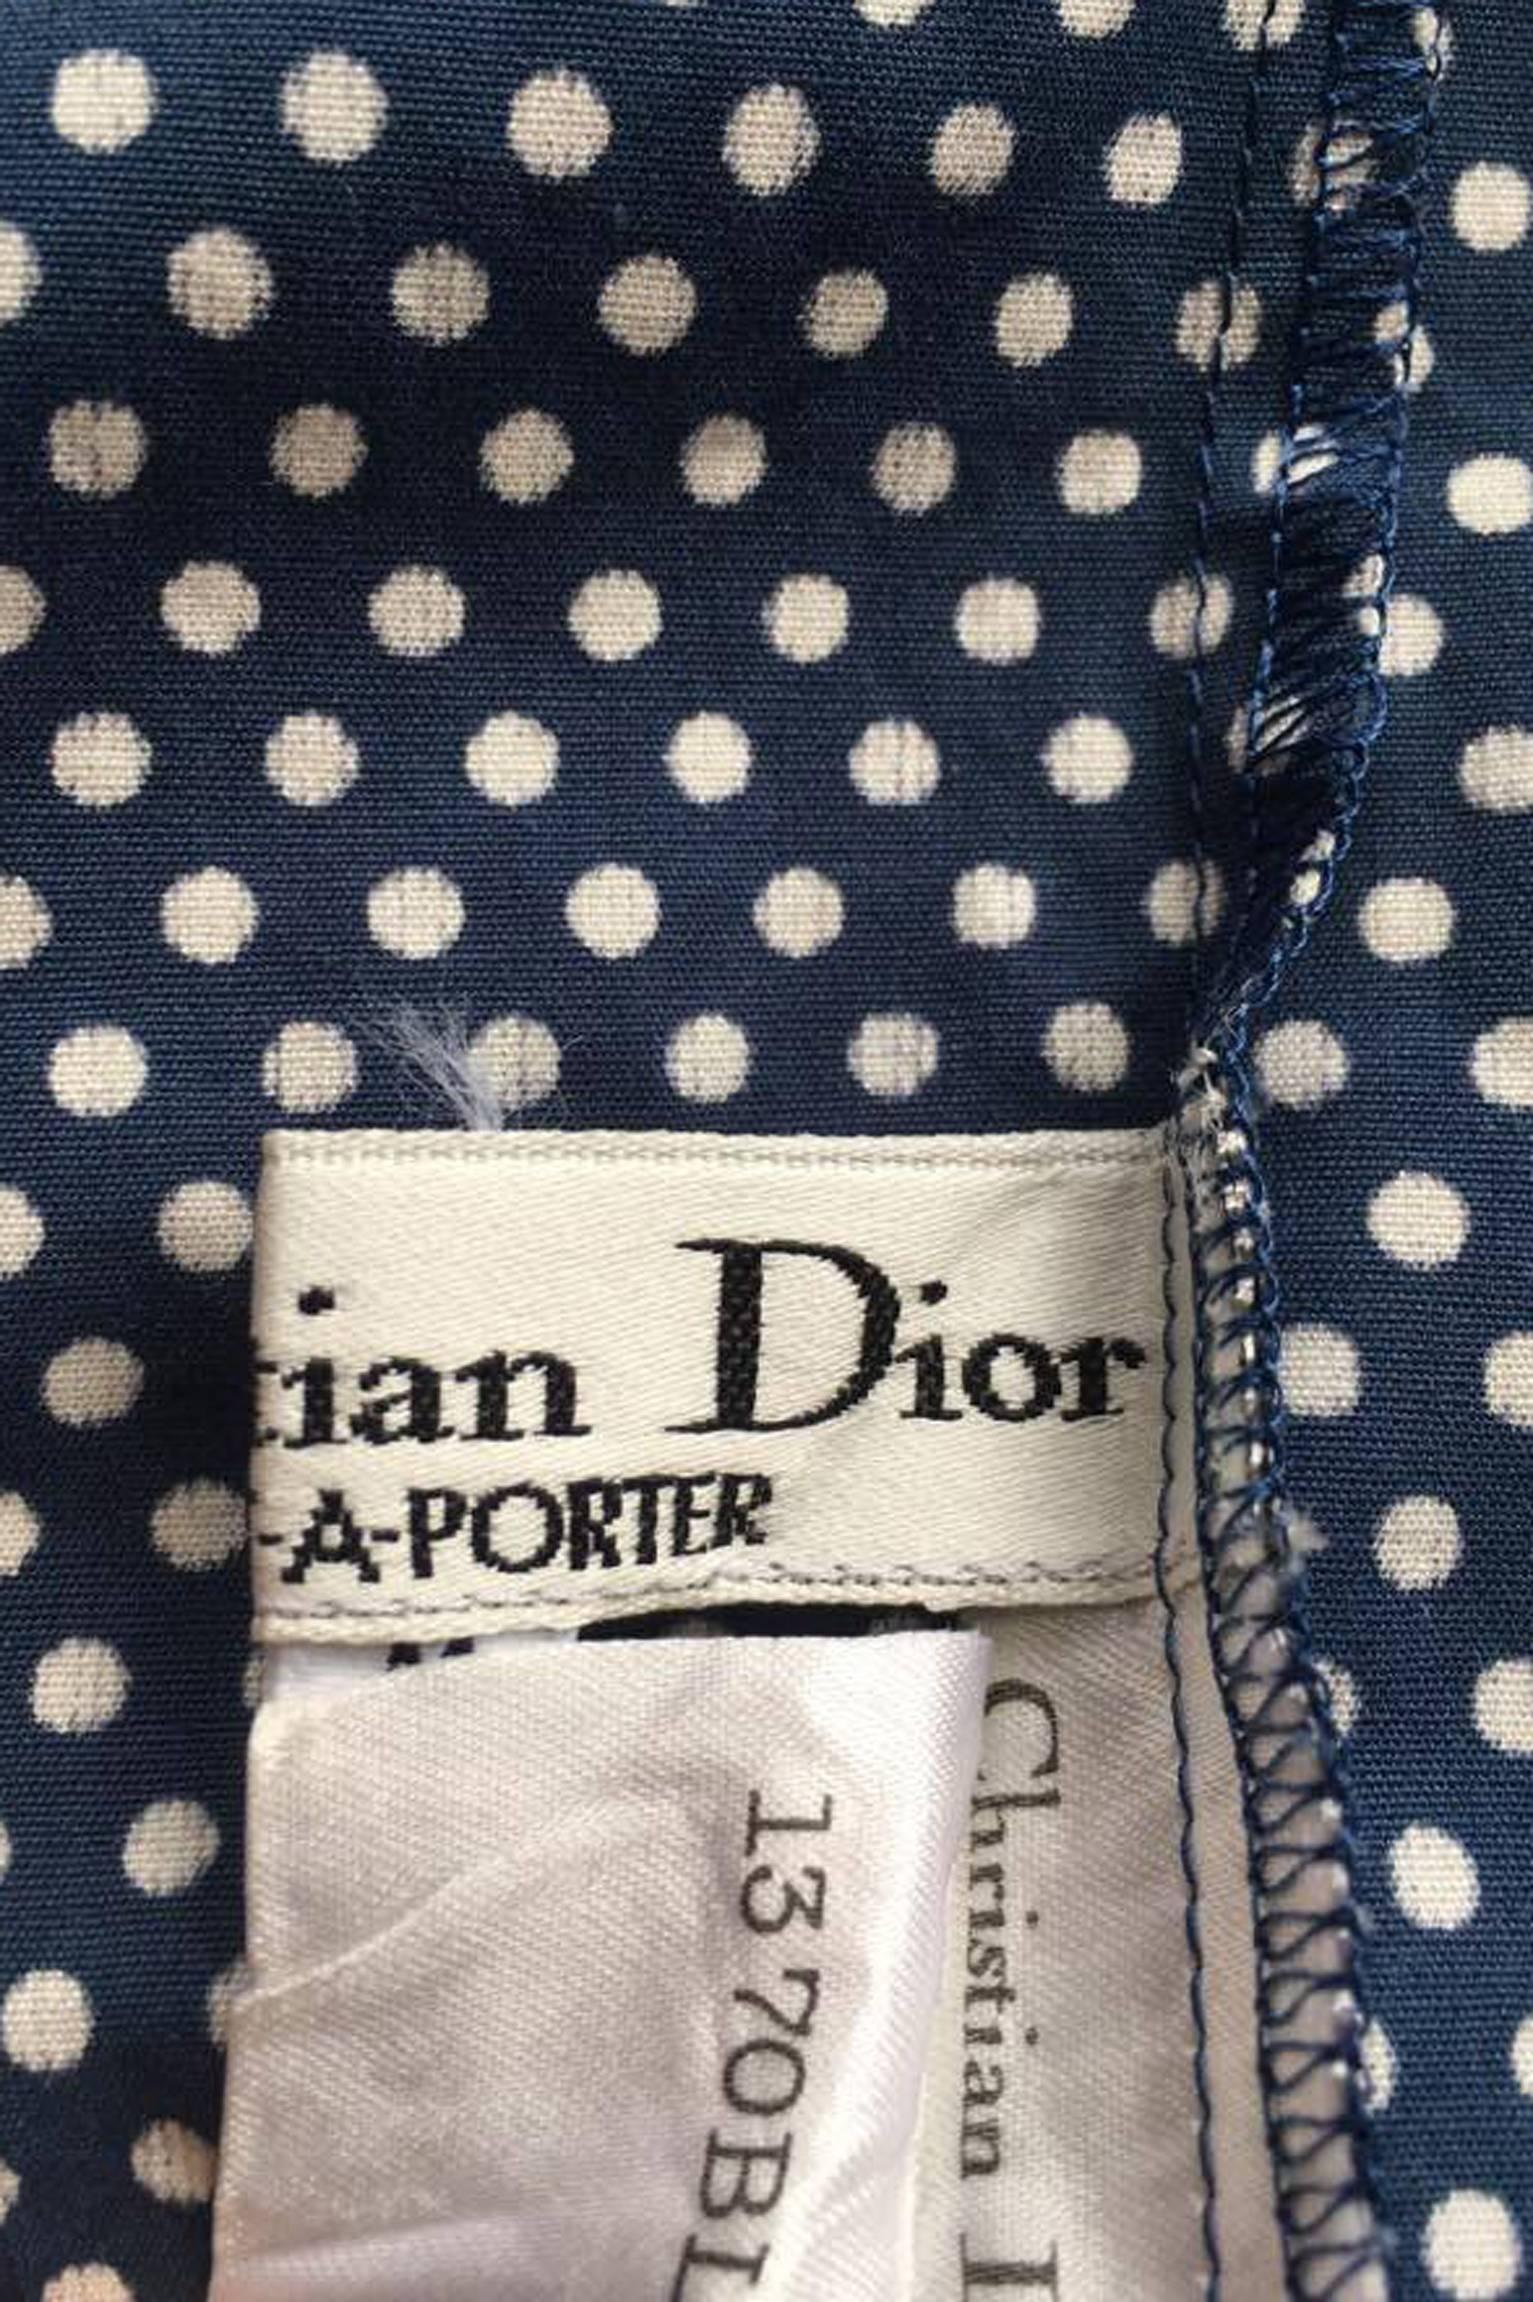 A gorgeous 1980s blue Christian Dior cotton blouse with white polka dots and a large ruffle collar with white trimmings. The blouse has a hidden front button closure with just one visible top button which gathers the double ruffled collar in the